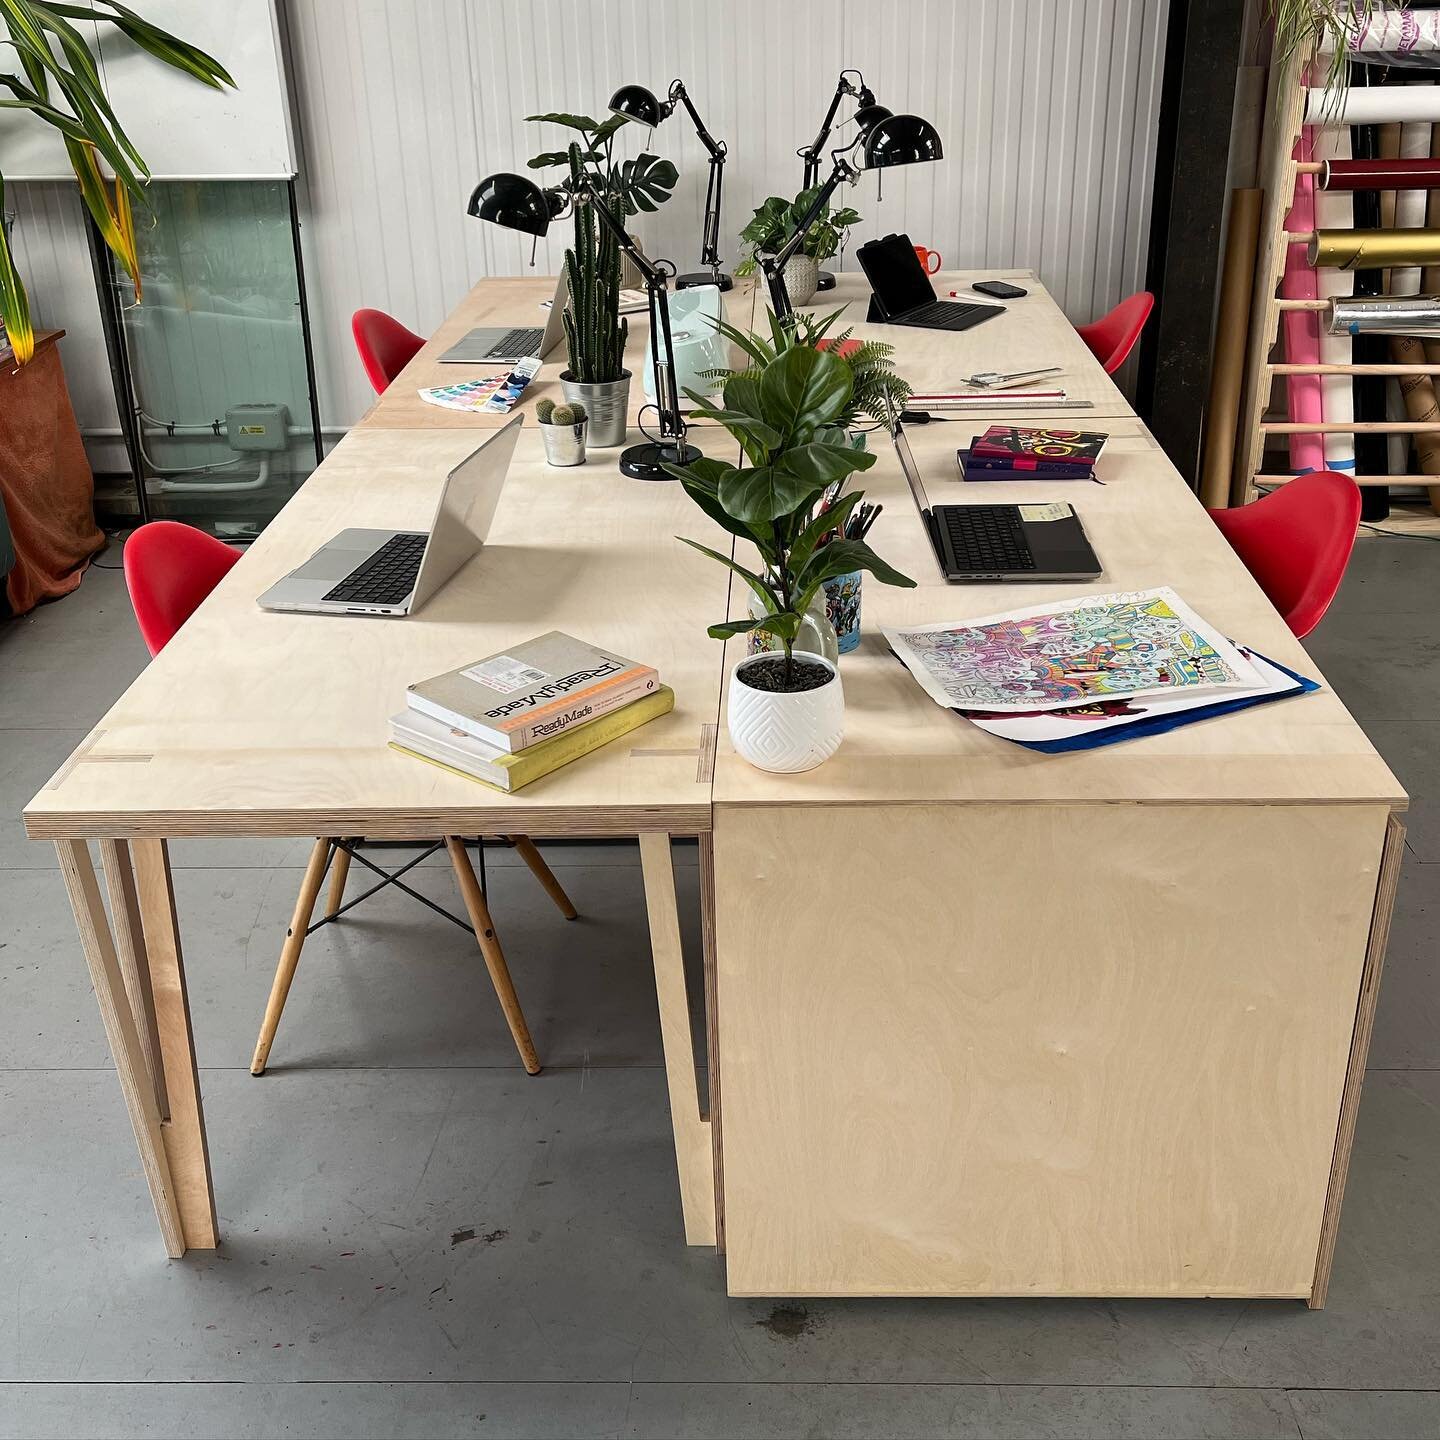 Birch ply desks make form a sheet and a half of 18mm 
Designed by @ammonite.designs 
Cut by @createcnclondon 
Construction by @create_180 
Place your orders or rent a desk space with us. 
#birchplywood #deskdesign #furnituredesign #cncfurniture